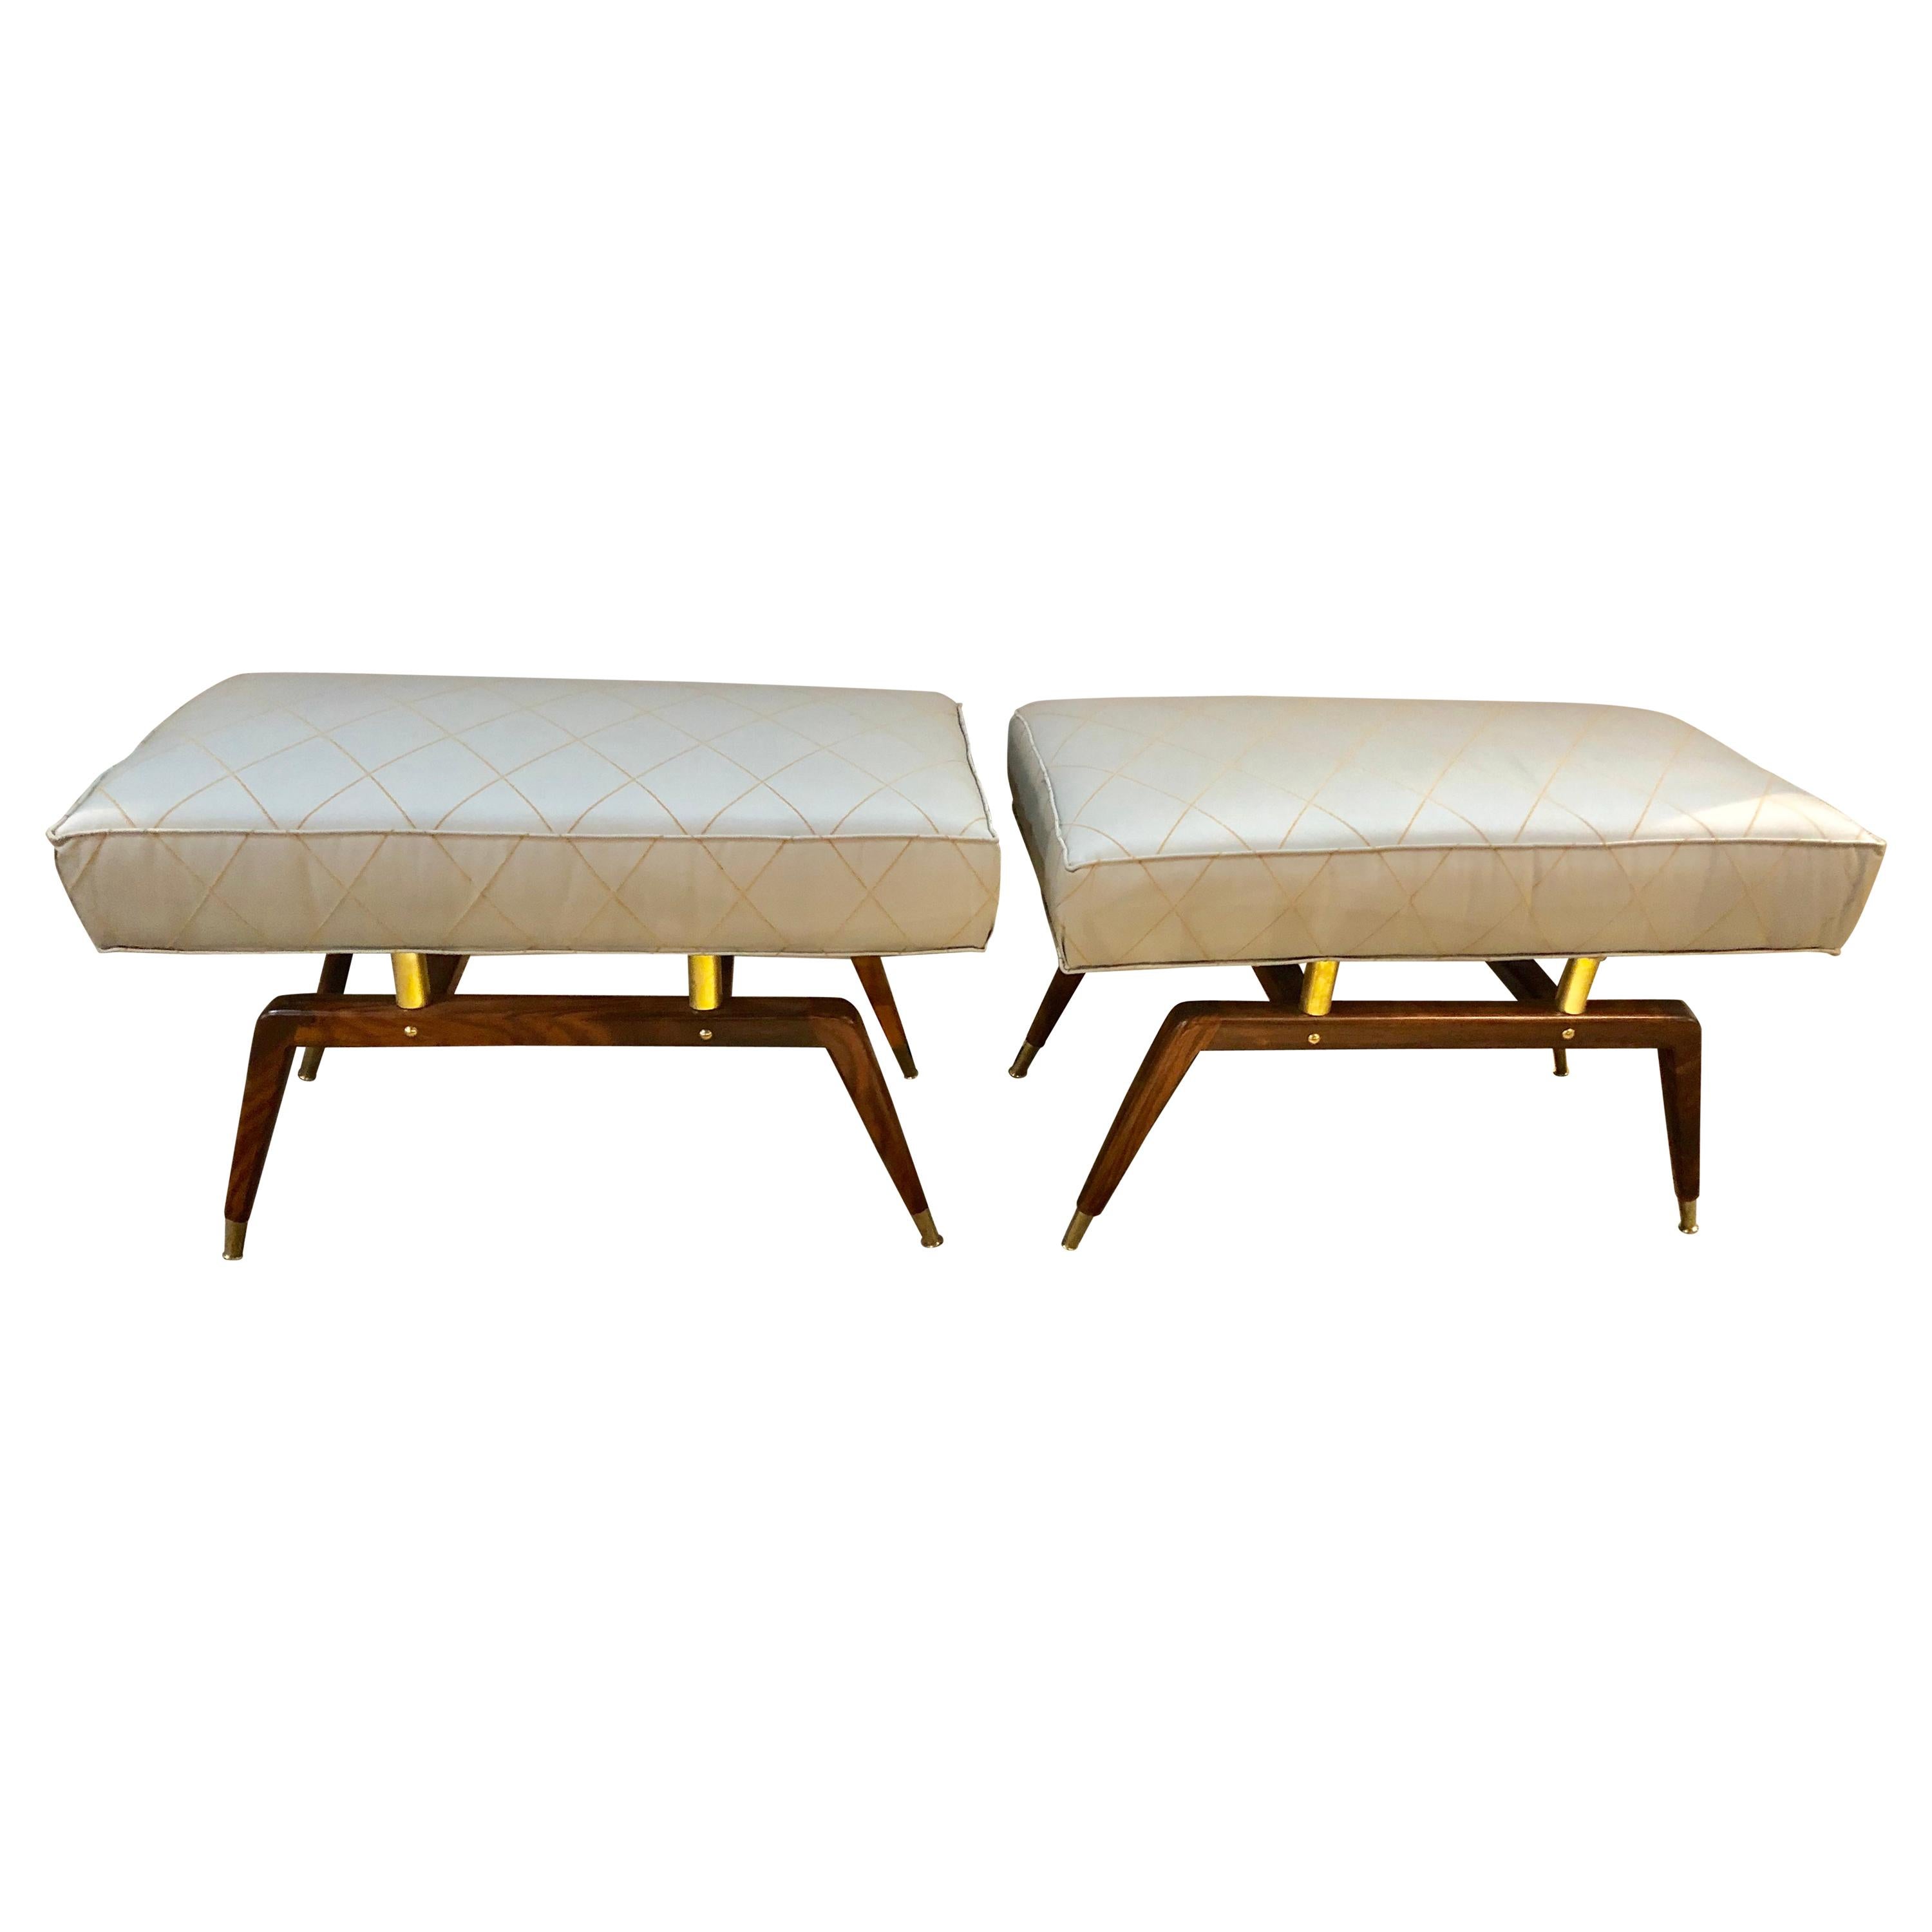 Pair of Bronze and Walnut Mid Century Modern Footstools or Window Bench